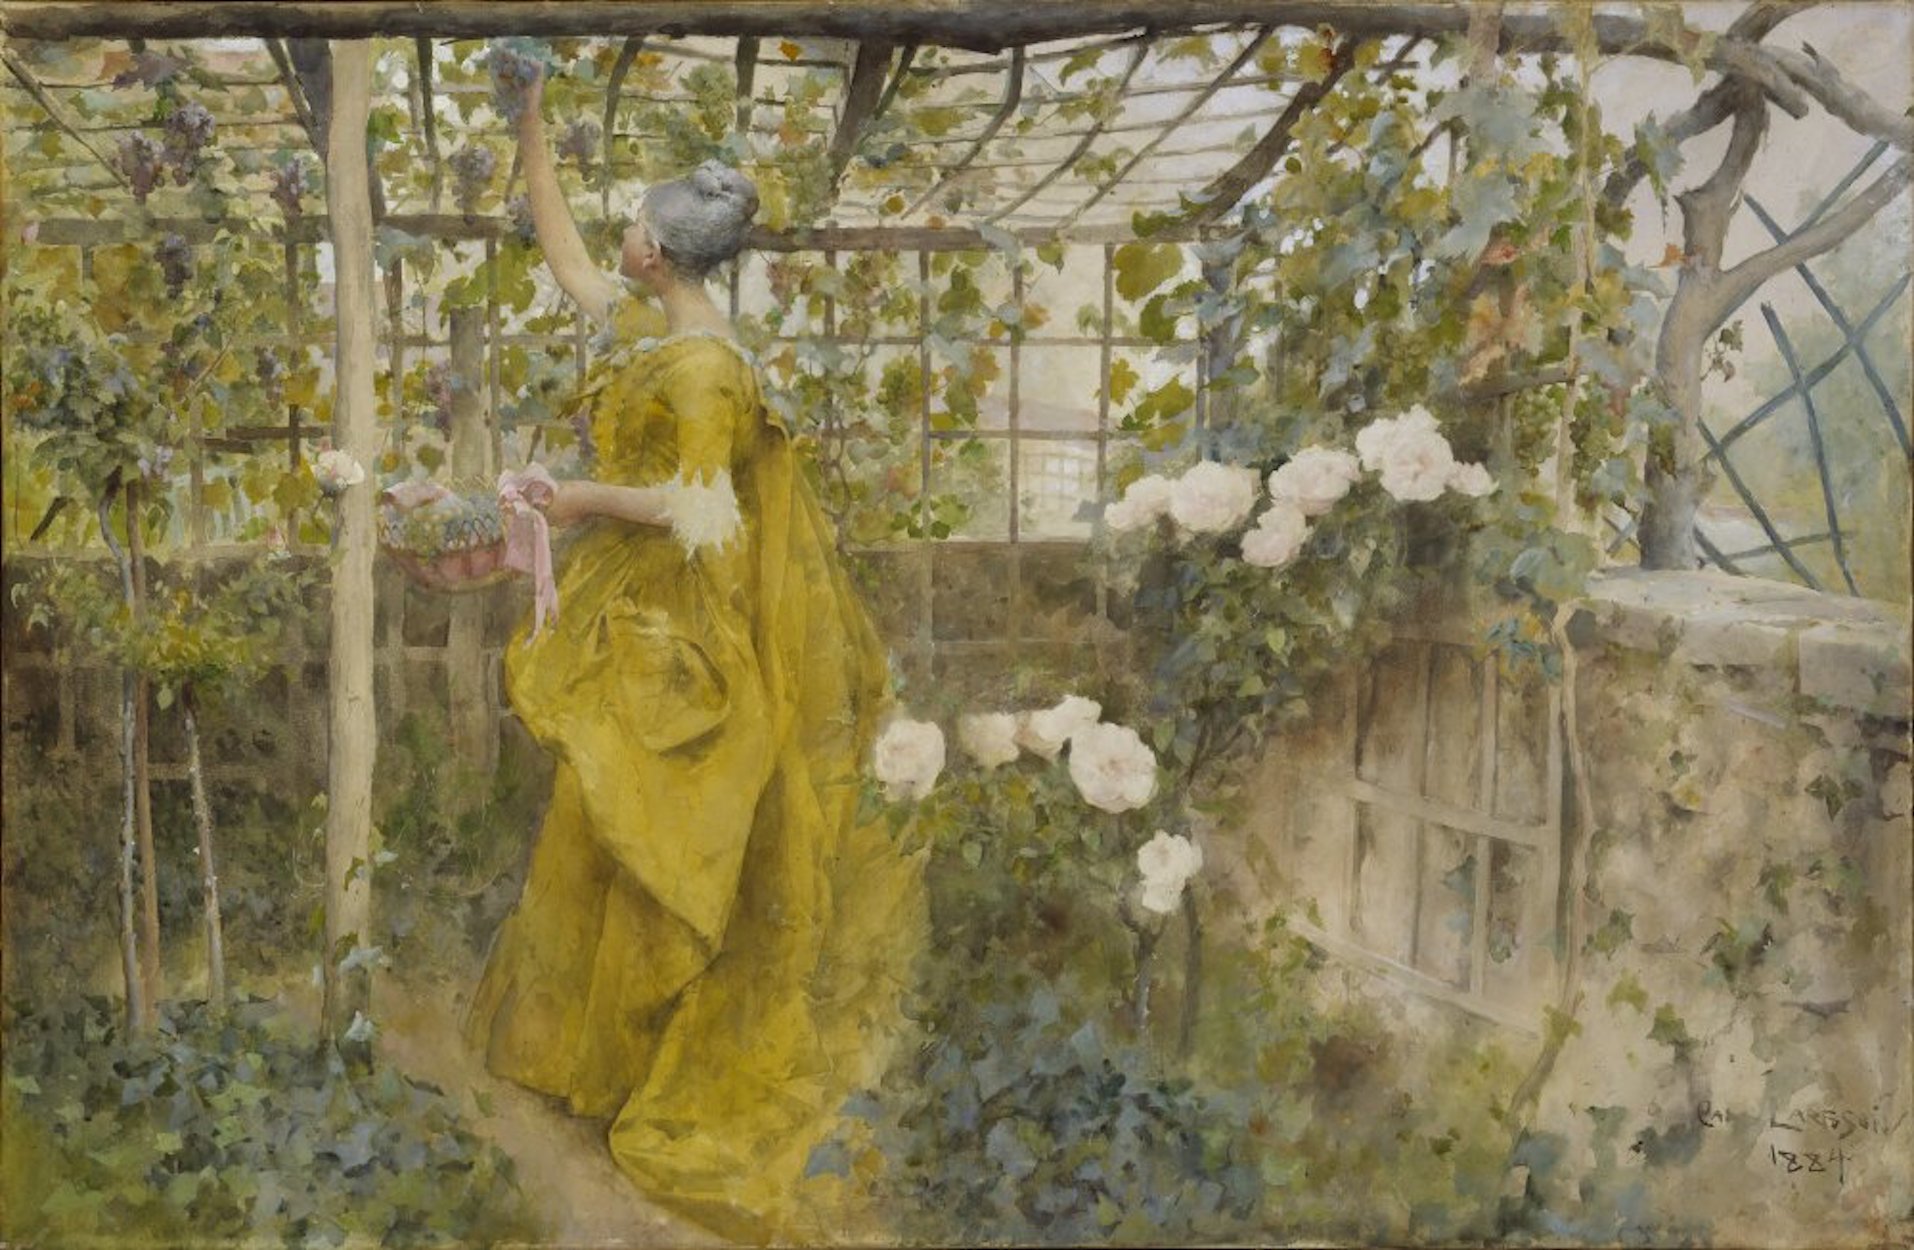 The Vine by Carl Larsson - 1884 - 60 x 92 cm Nationalmuseum